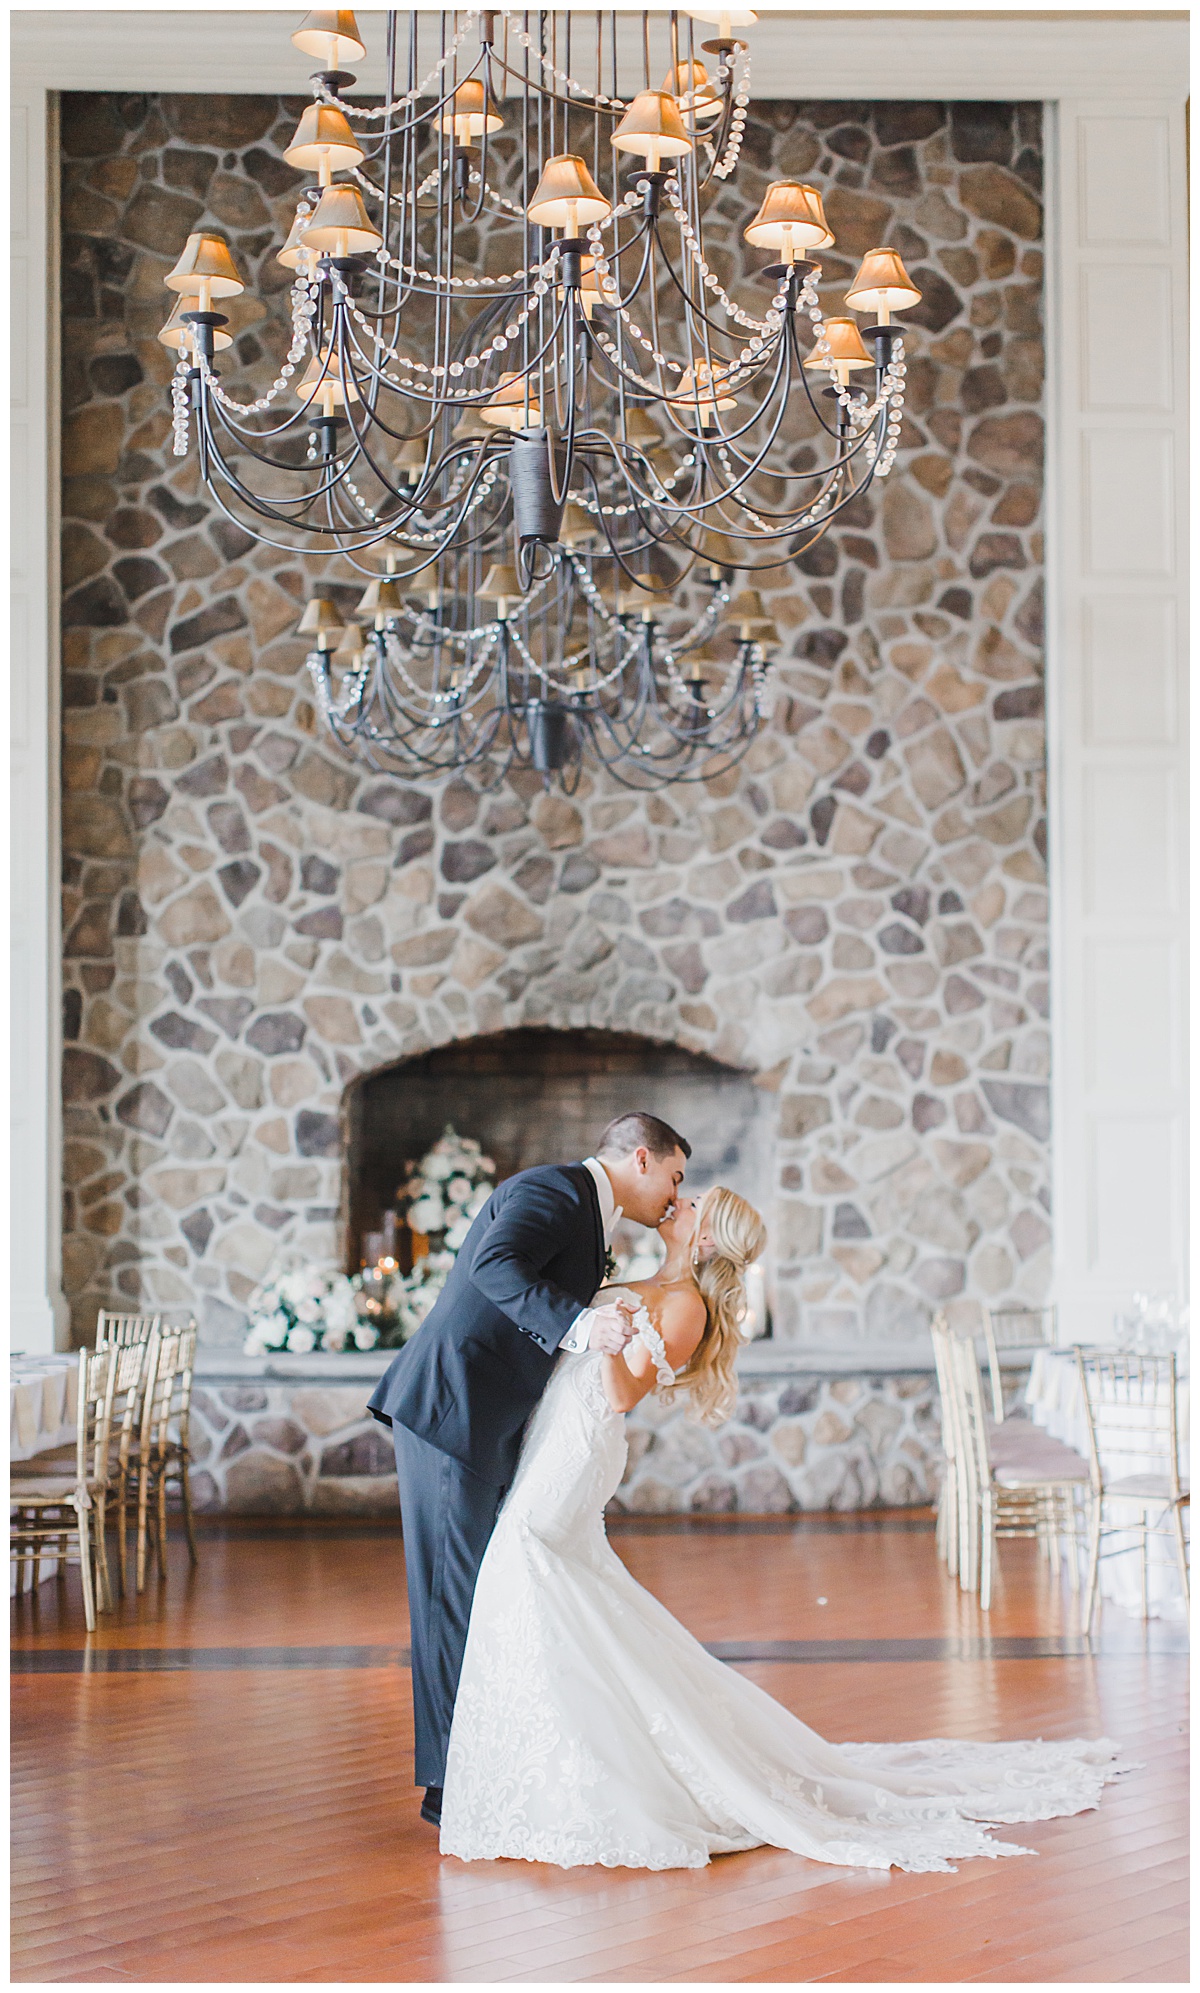 Meg and Adam at The Ryland Inn—New Jersey Bride